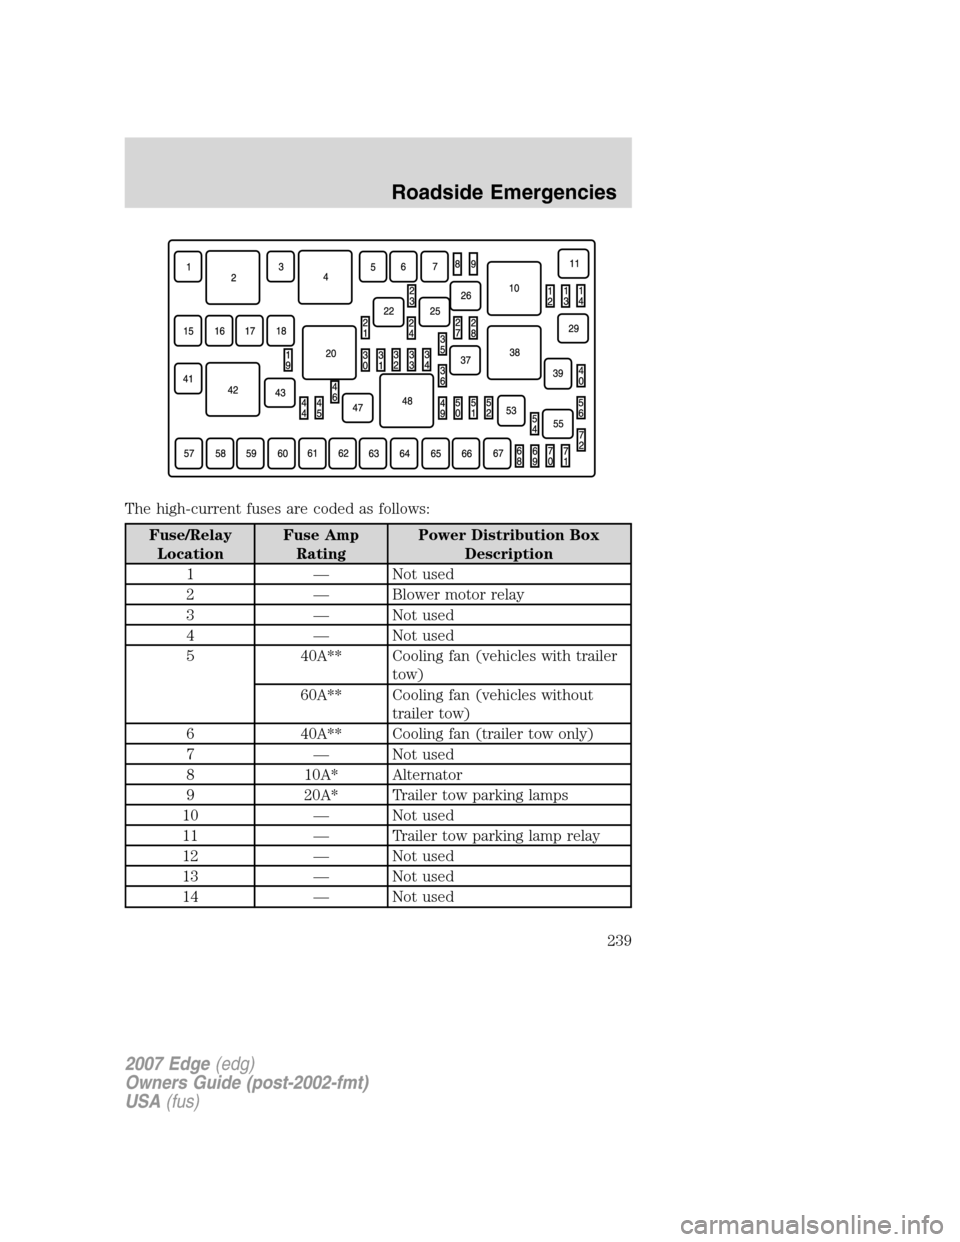 FORD EDGE 2007 1.G Owners Manual The high-current fuses are coded as follows:
Fuse/Relay
LocationFuse Amp
RatingPower Distribution Box
Description
1 — Not used
2 — Blower motor relay
3 — Not used
4 — Not used
5 40A** Cooling 